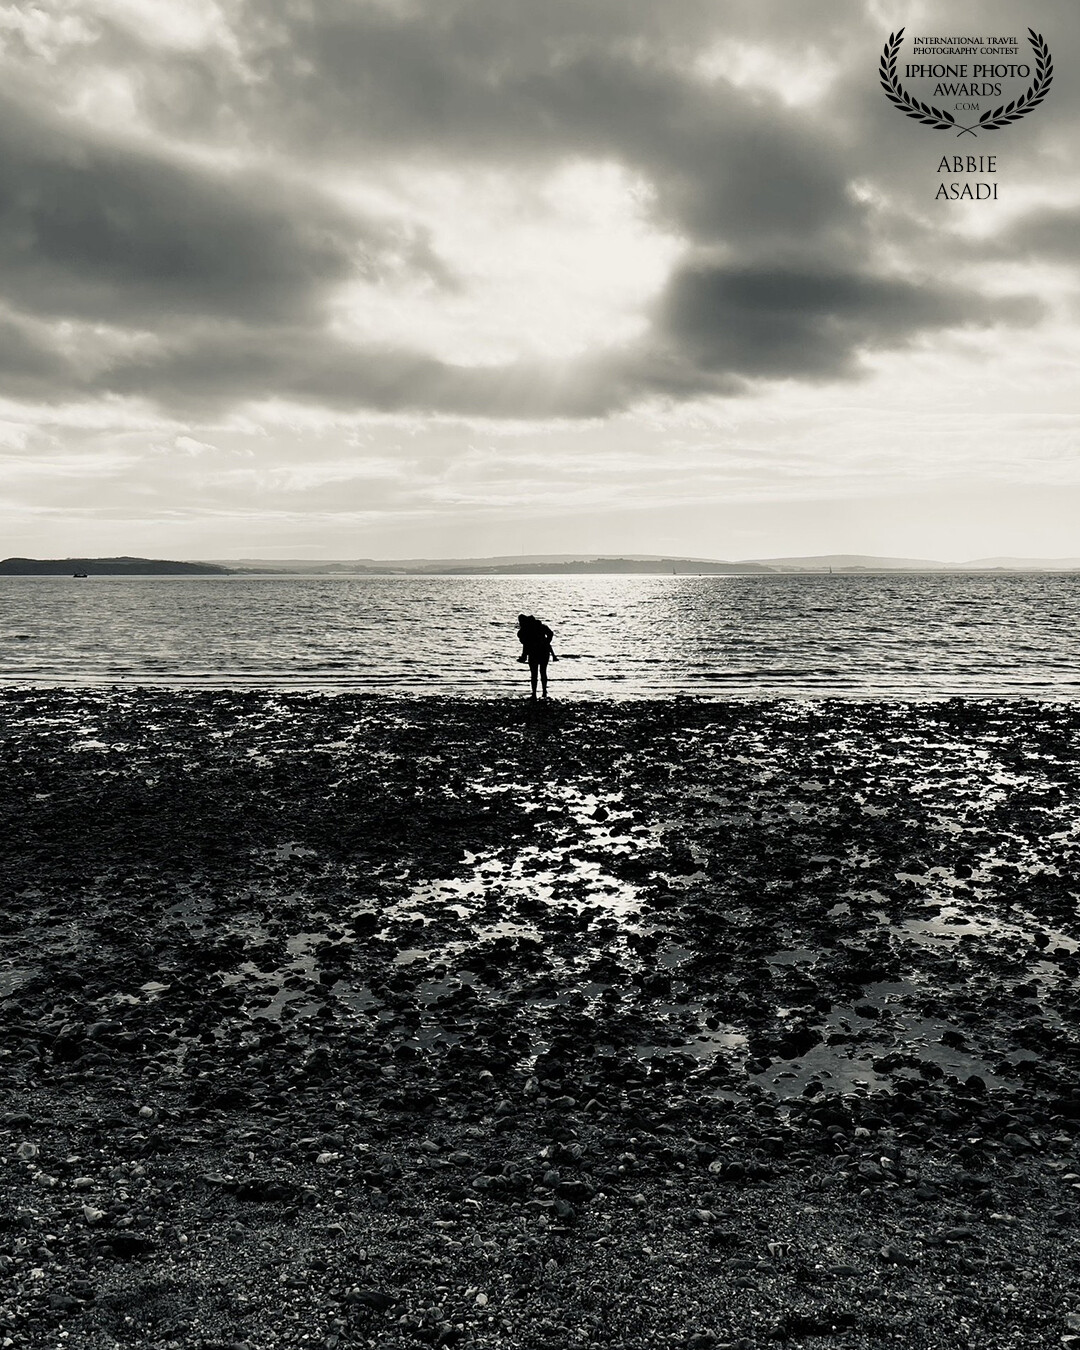 Scenes overlooking the Solent. Contemplative and mood inducing. The patches of light were the draw in this image with the scene providing that classic rule of thirds.